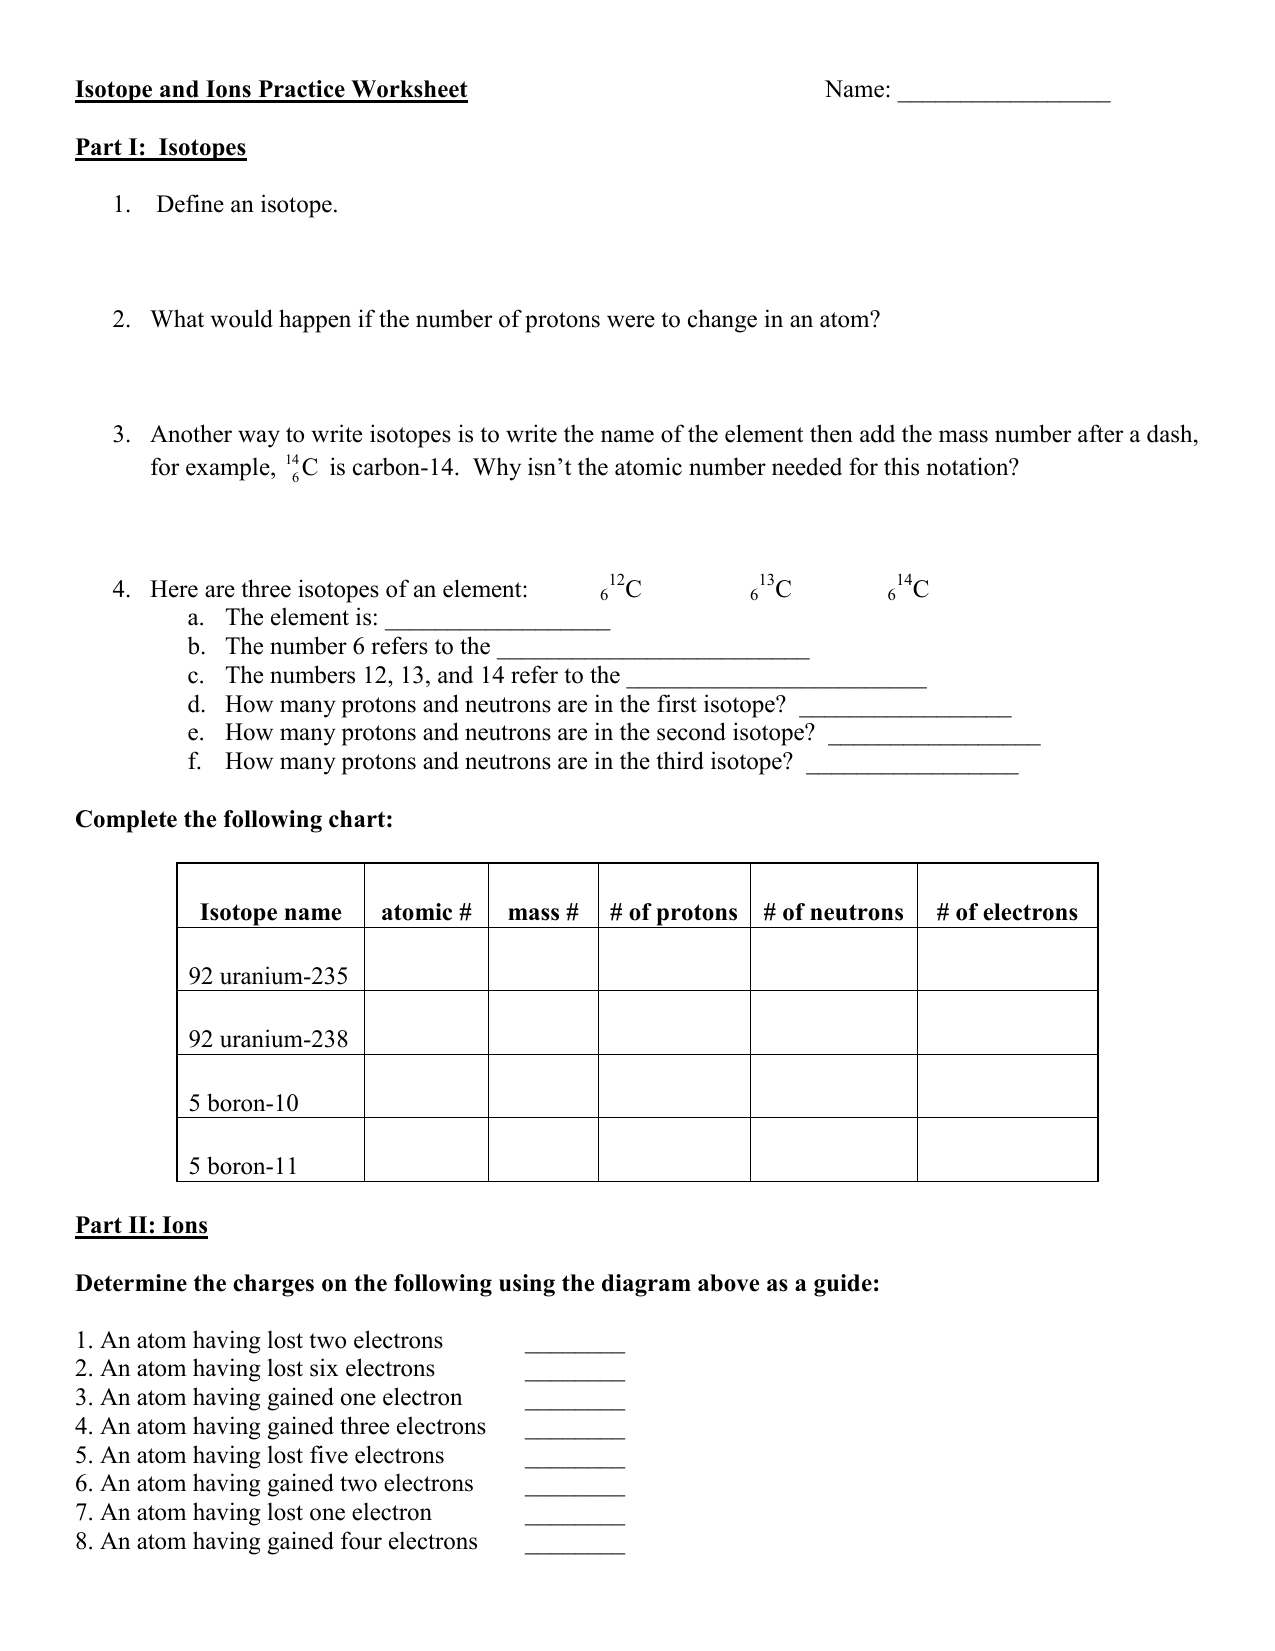 Isotope and Ions Practice Worksheet Name (21) For Ions And Isotopes Worksheet